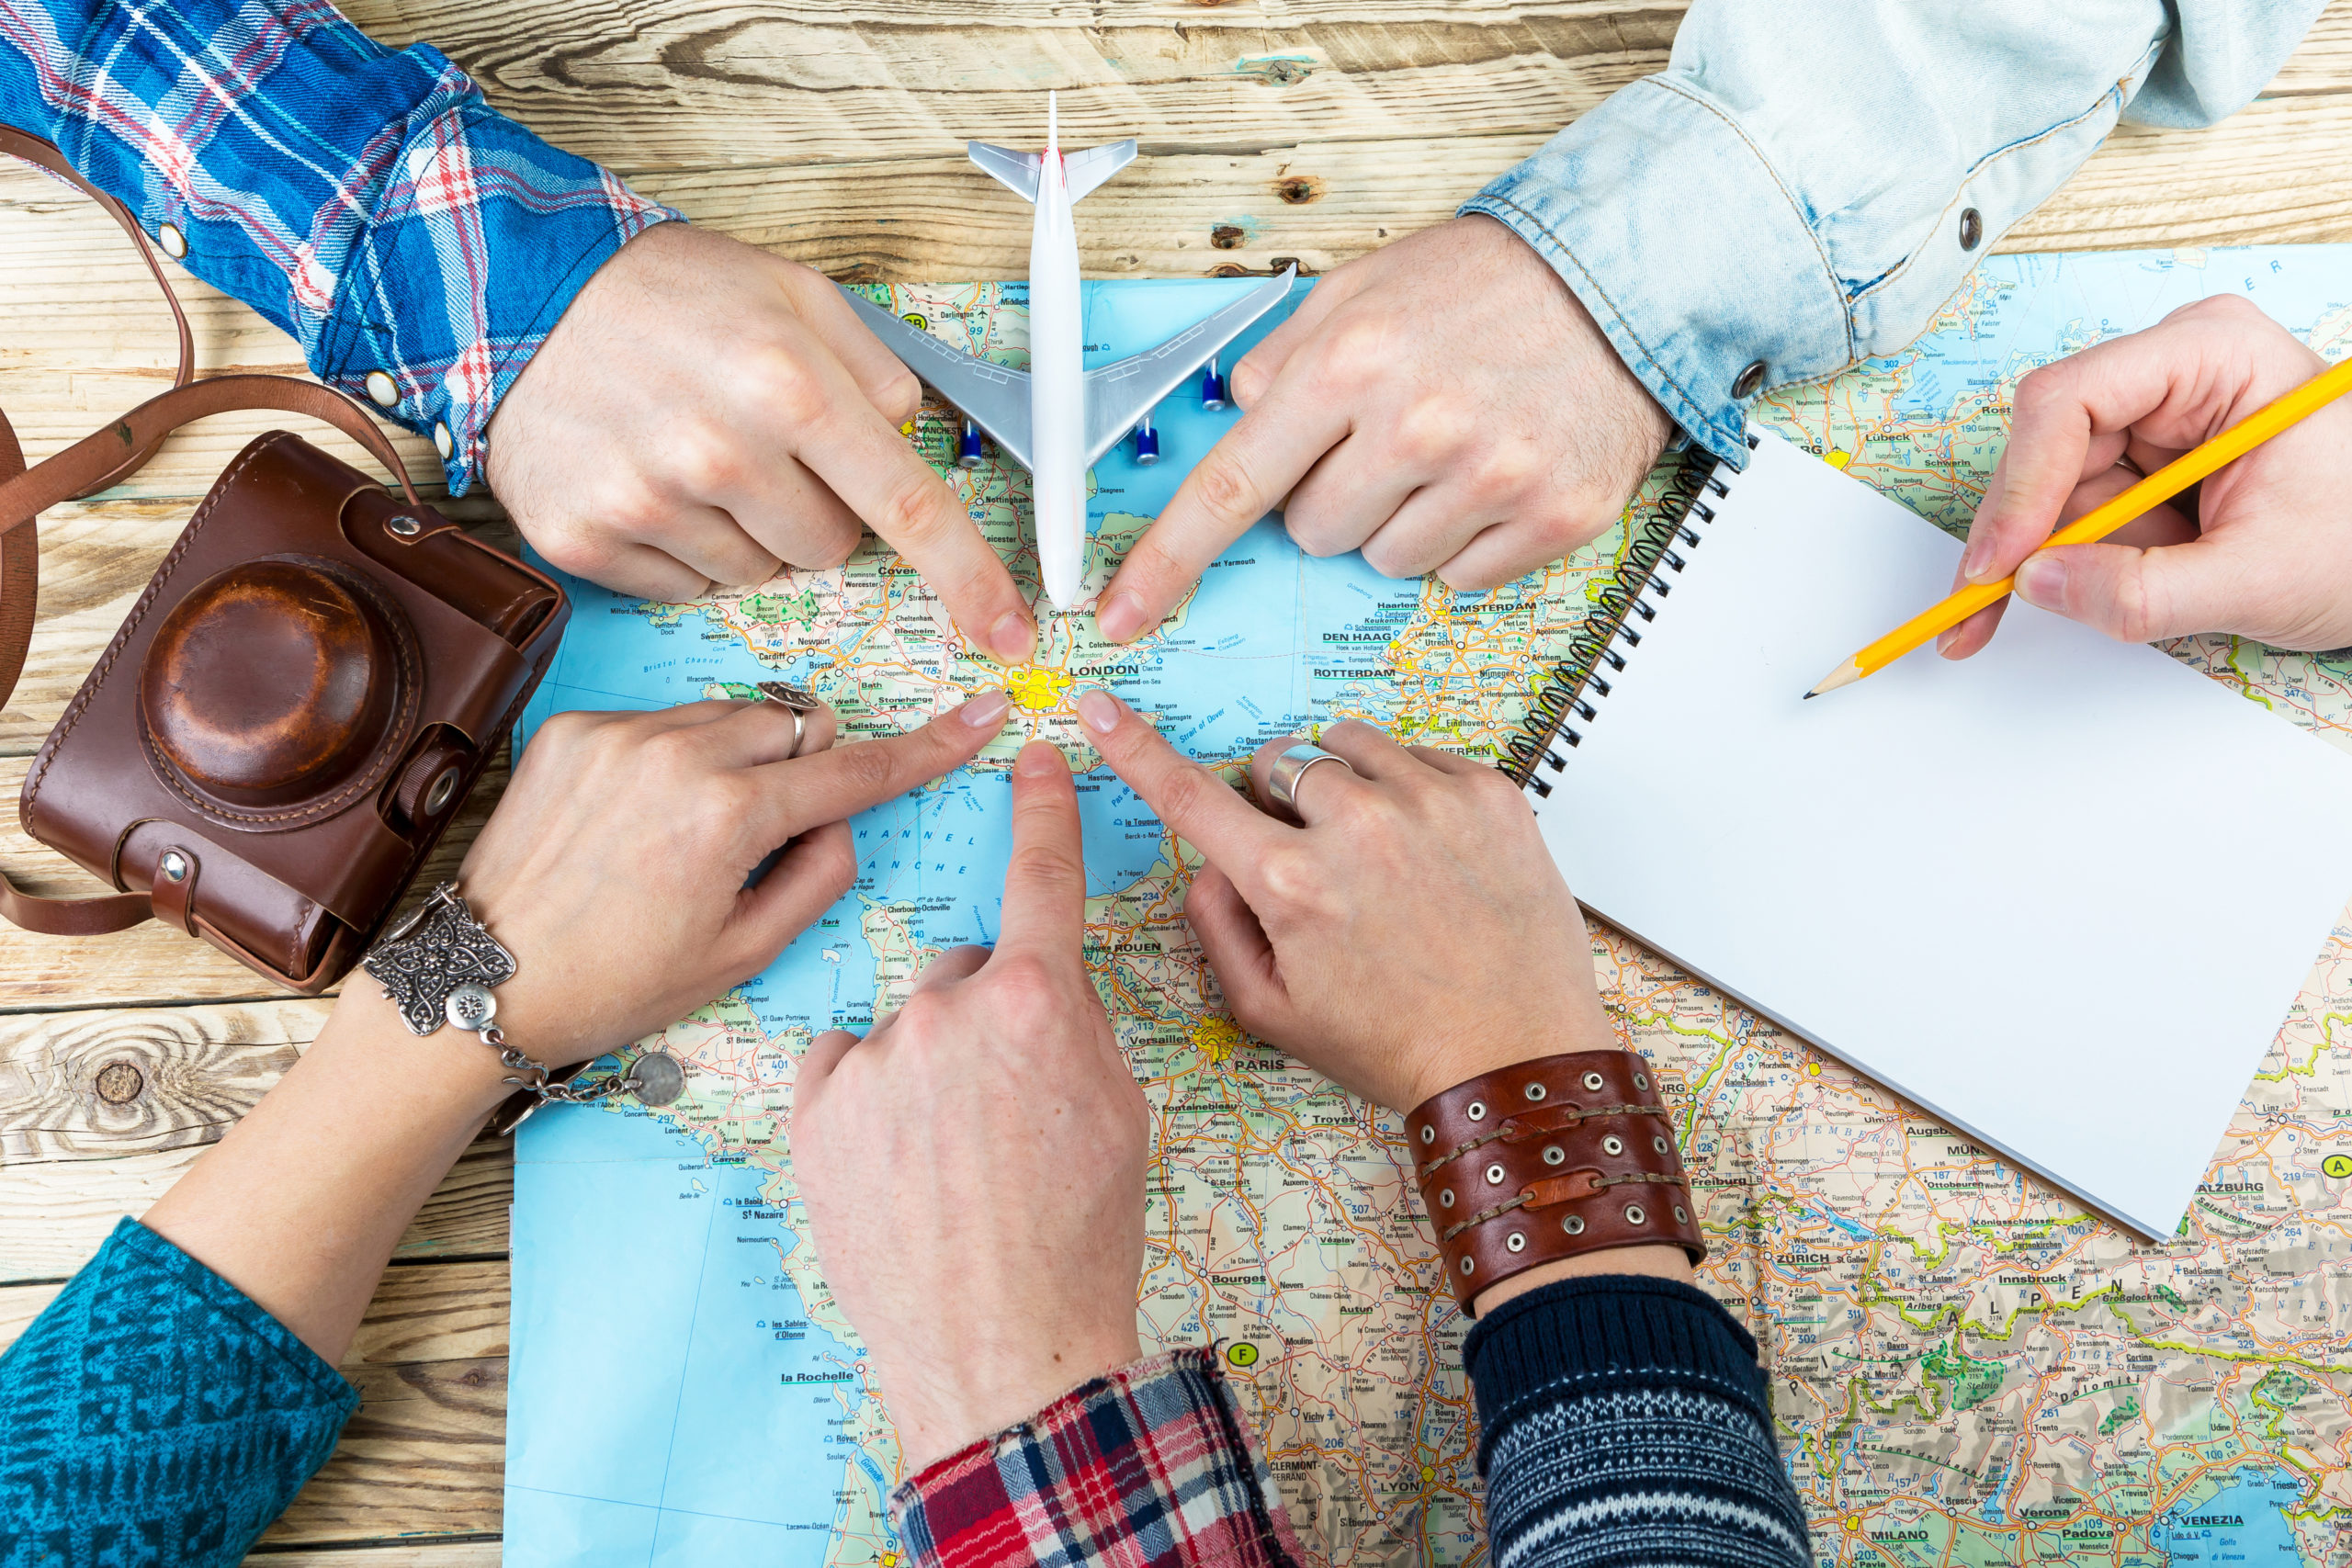 How can you plan group travel to give back?